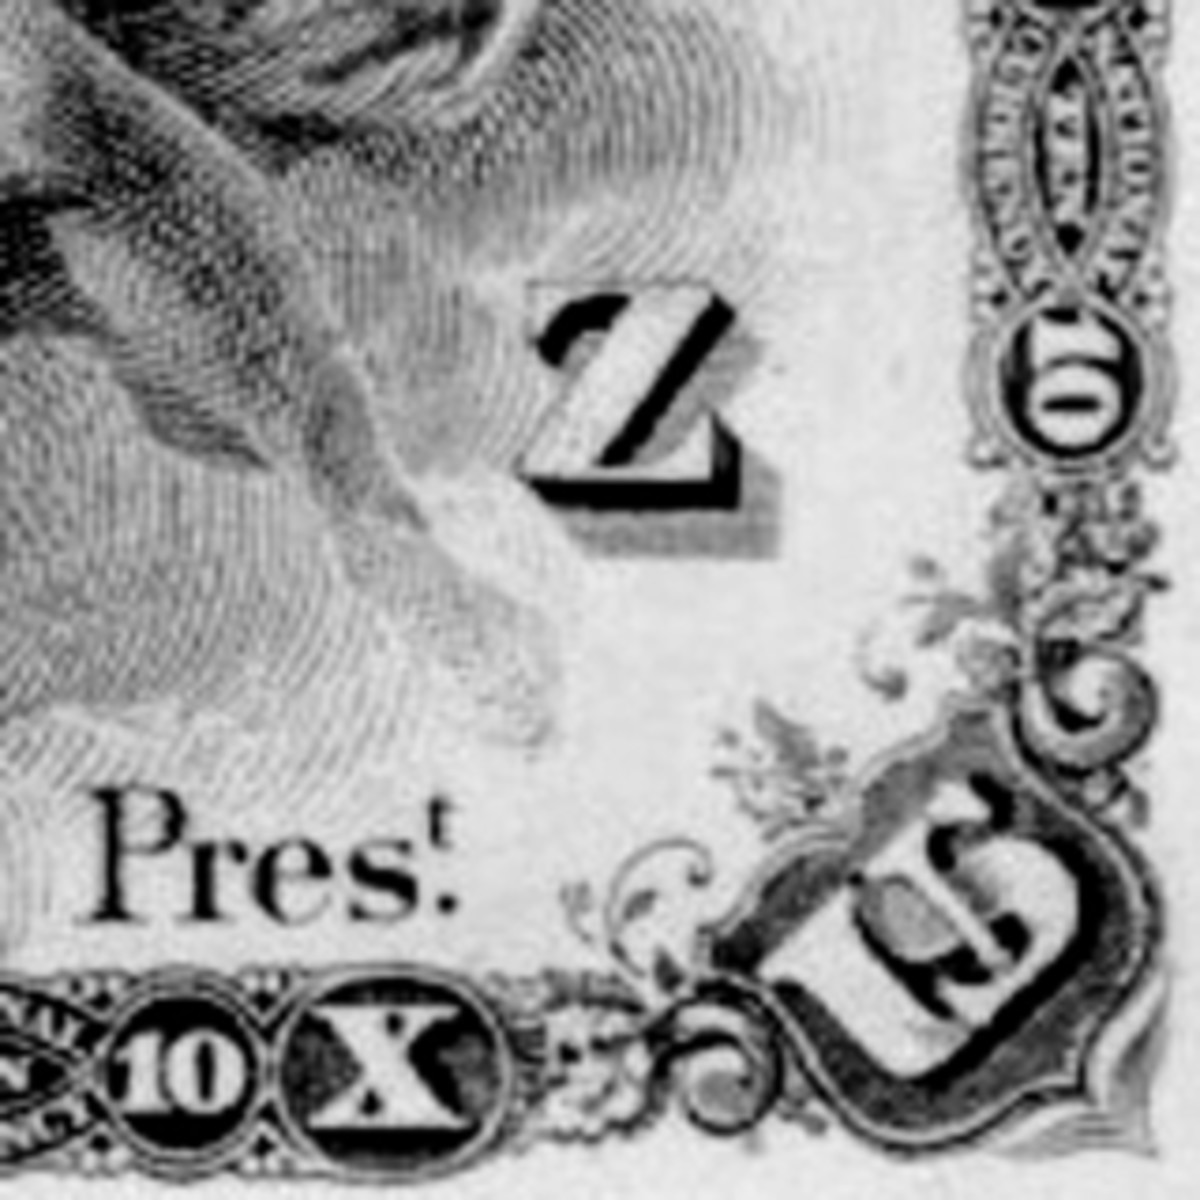 A $10 national from The National Shawmit Bank of Boston with the rare Z plate position letter.